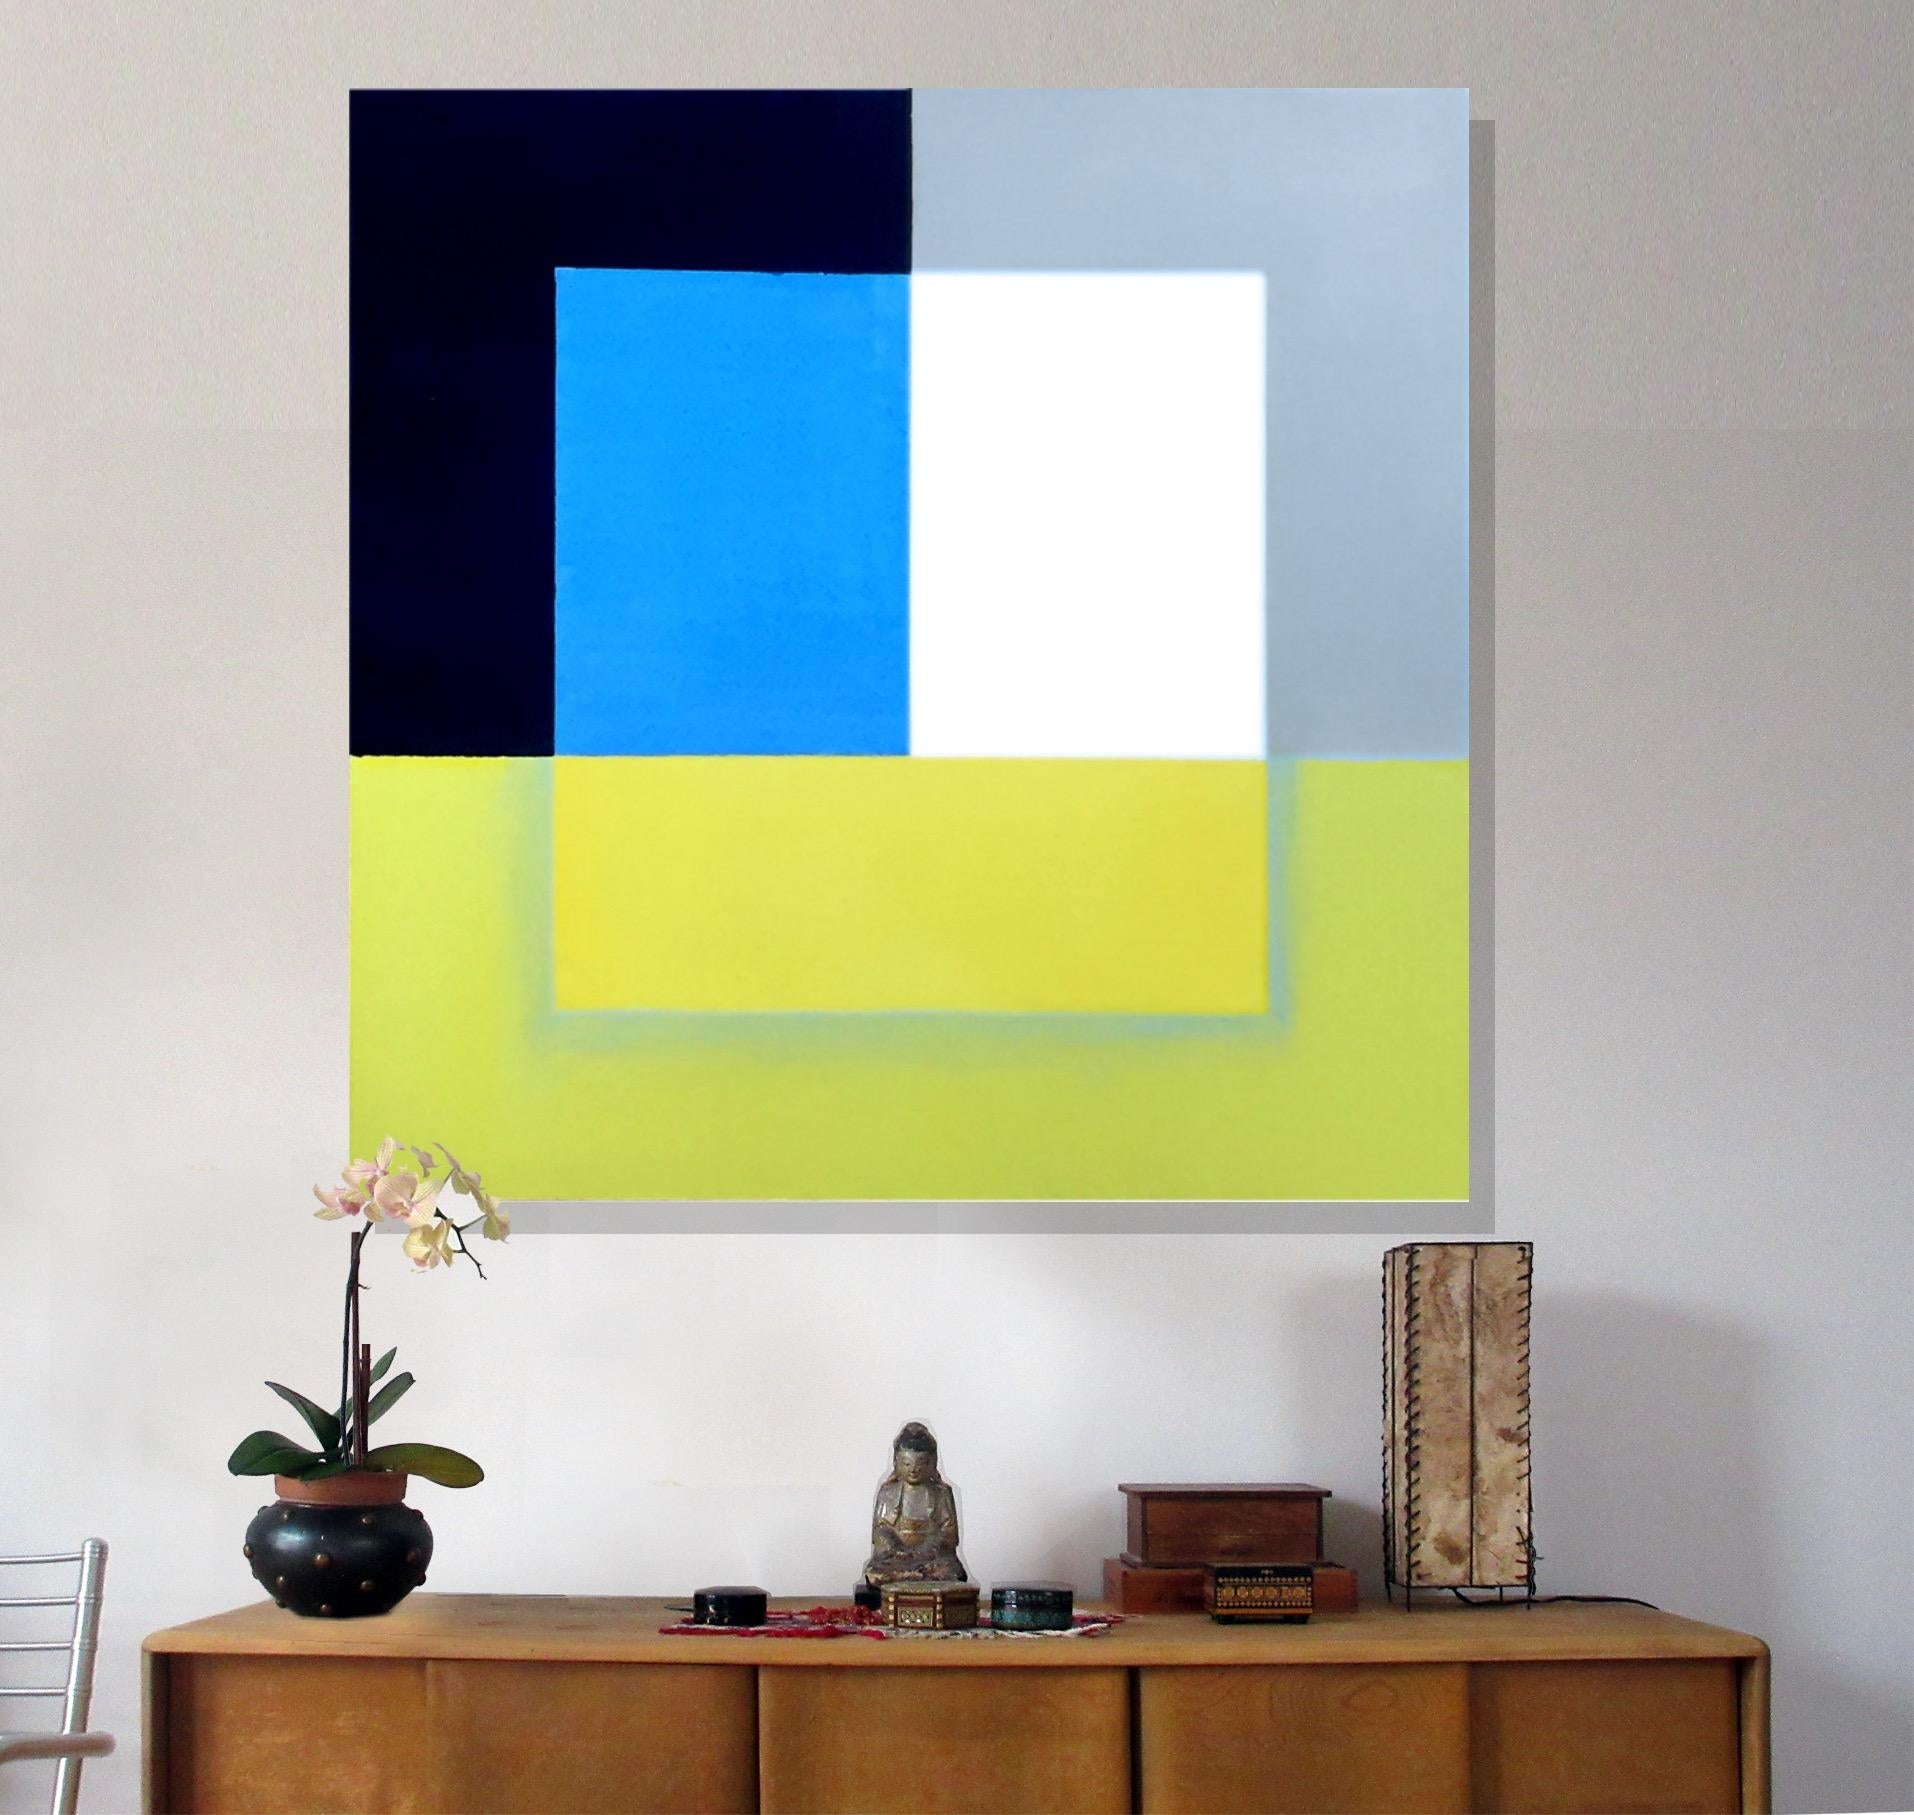 Coincidence, Geometric Abstract Series - Painting by Robert Petrick